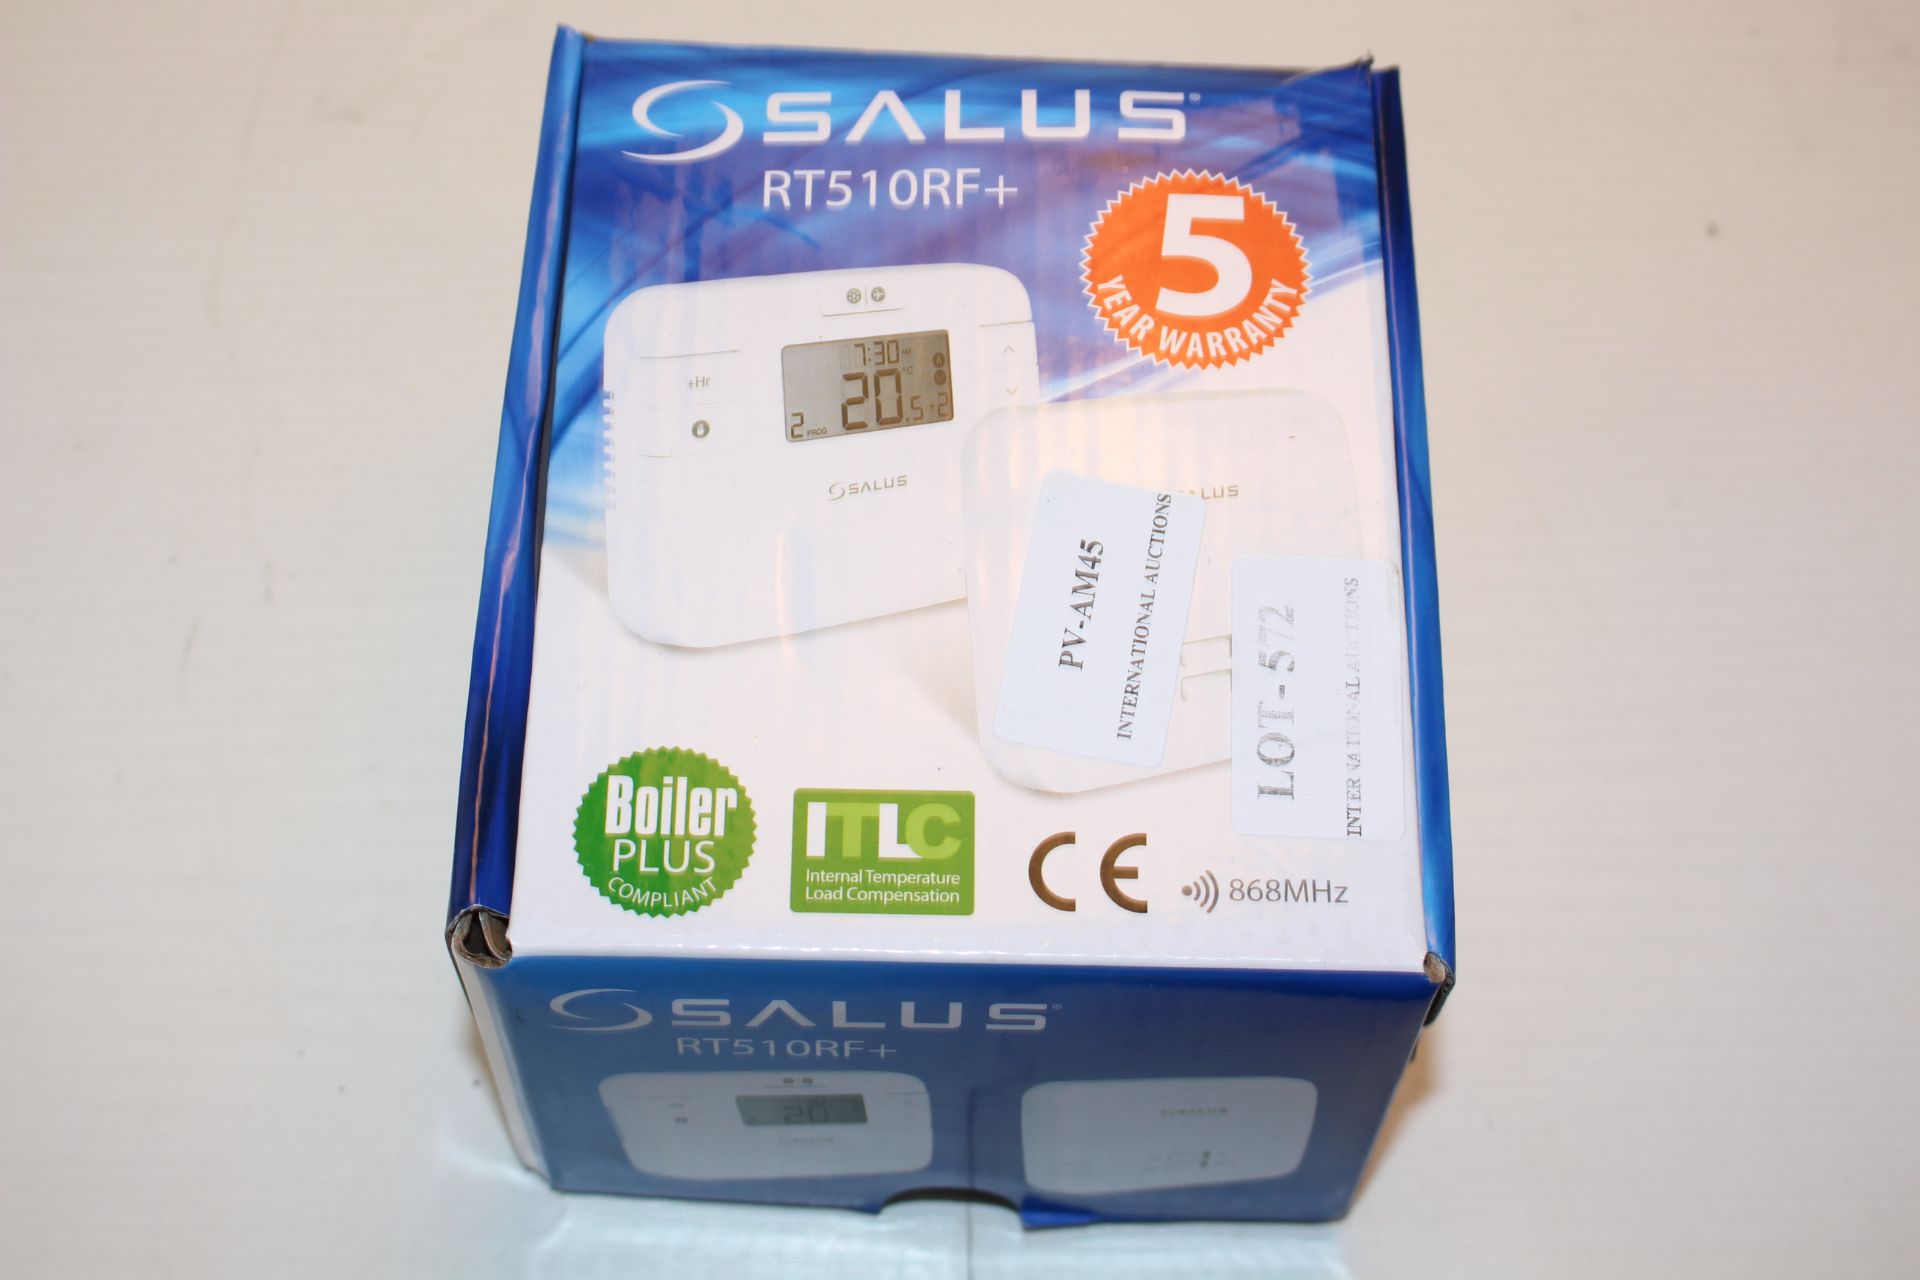 BOXED SALUS RT510RF+ BOILER PLUS COMPLIANT PROGRAMMABLE ROOM THERMOSTAT RRP £40.59Condition